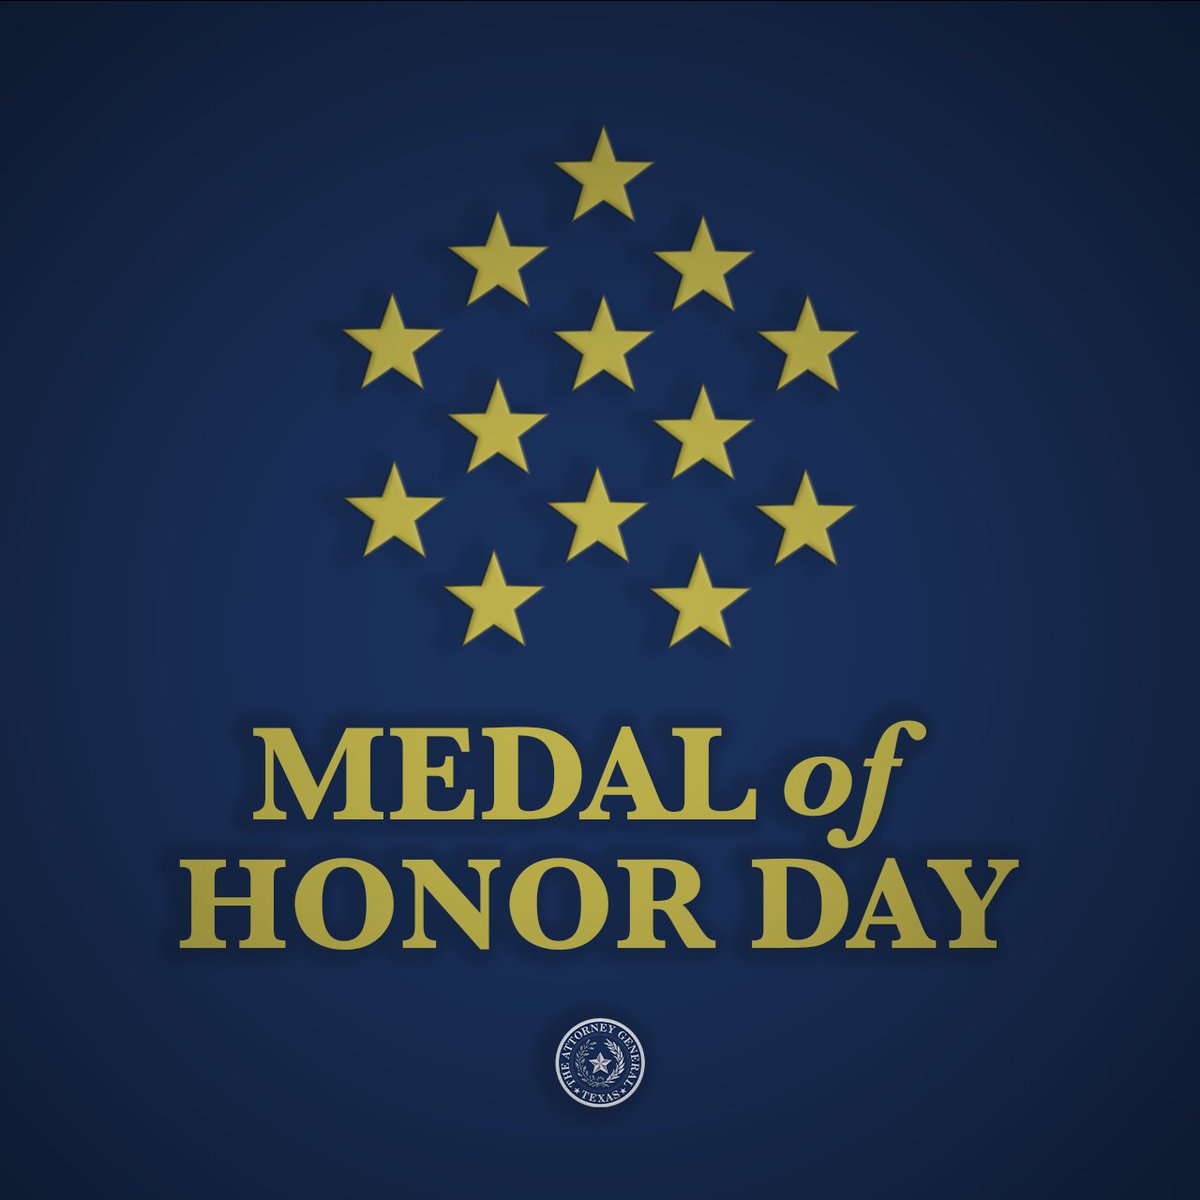 Today is #NationalMedalofHonorDay. We are remembering those in uniform who have put their life on the line for this nation and have earned the highest of military honors.